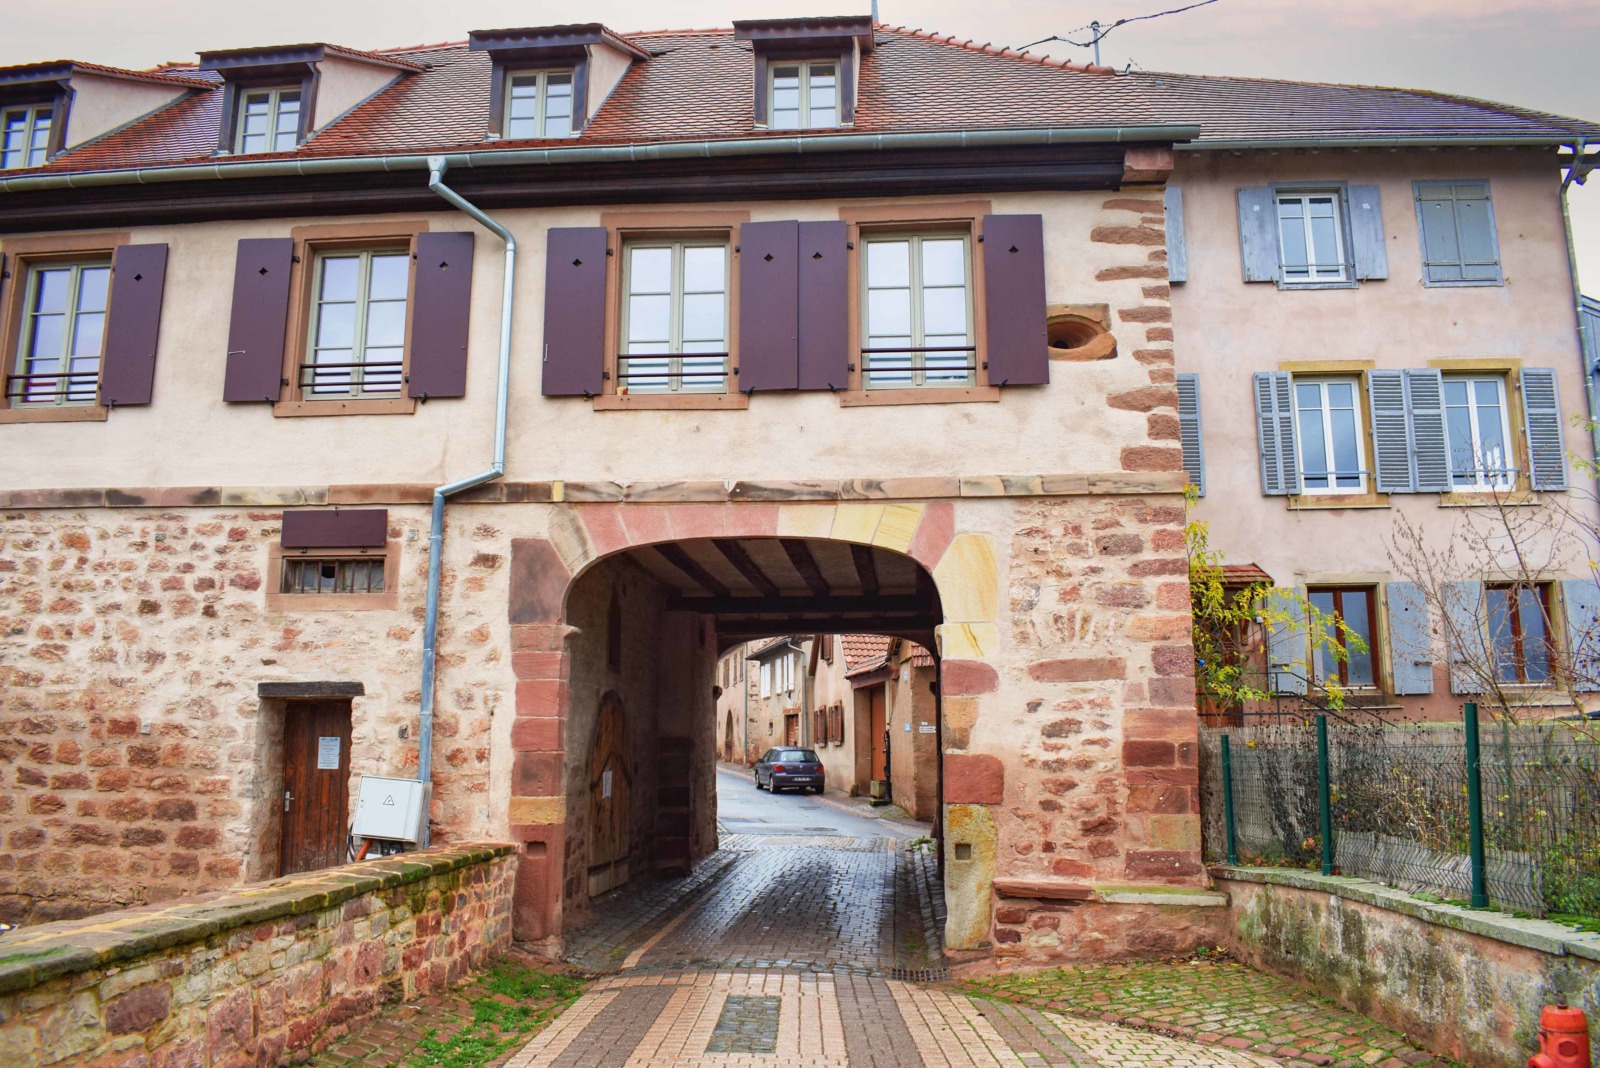 Fortified City Gates of Alsace - Porte du Sud, Wangen © French Moments